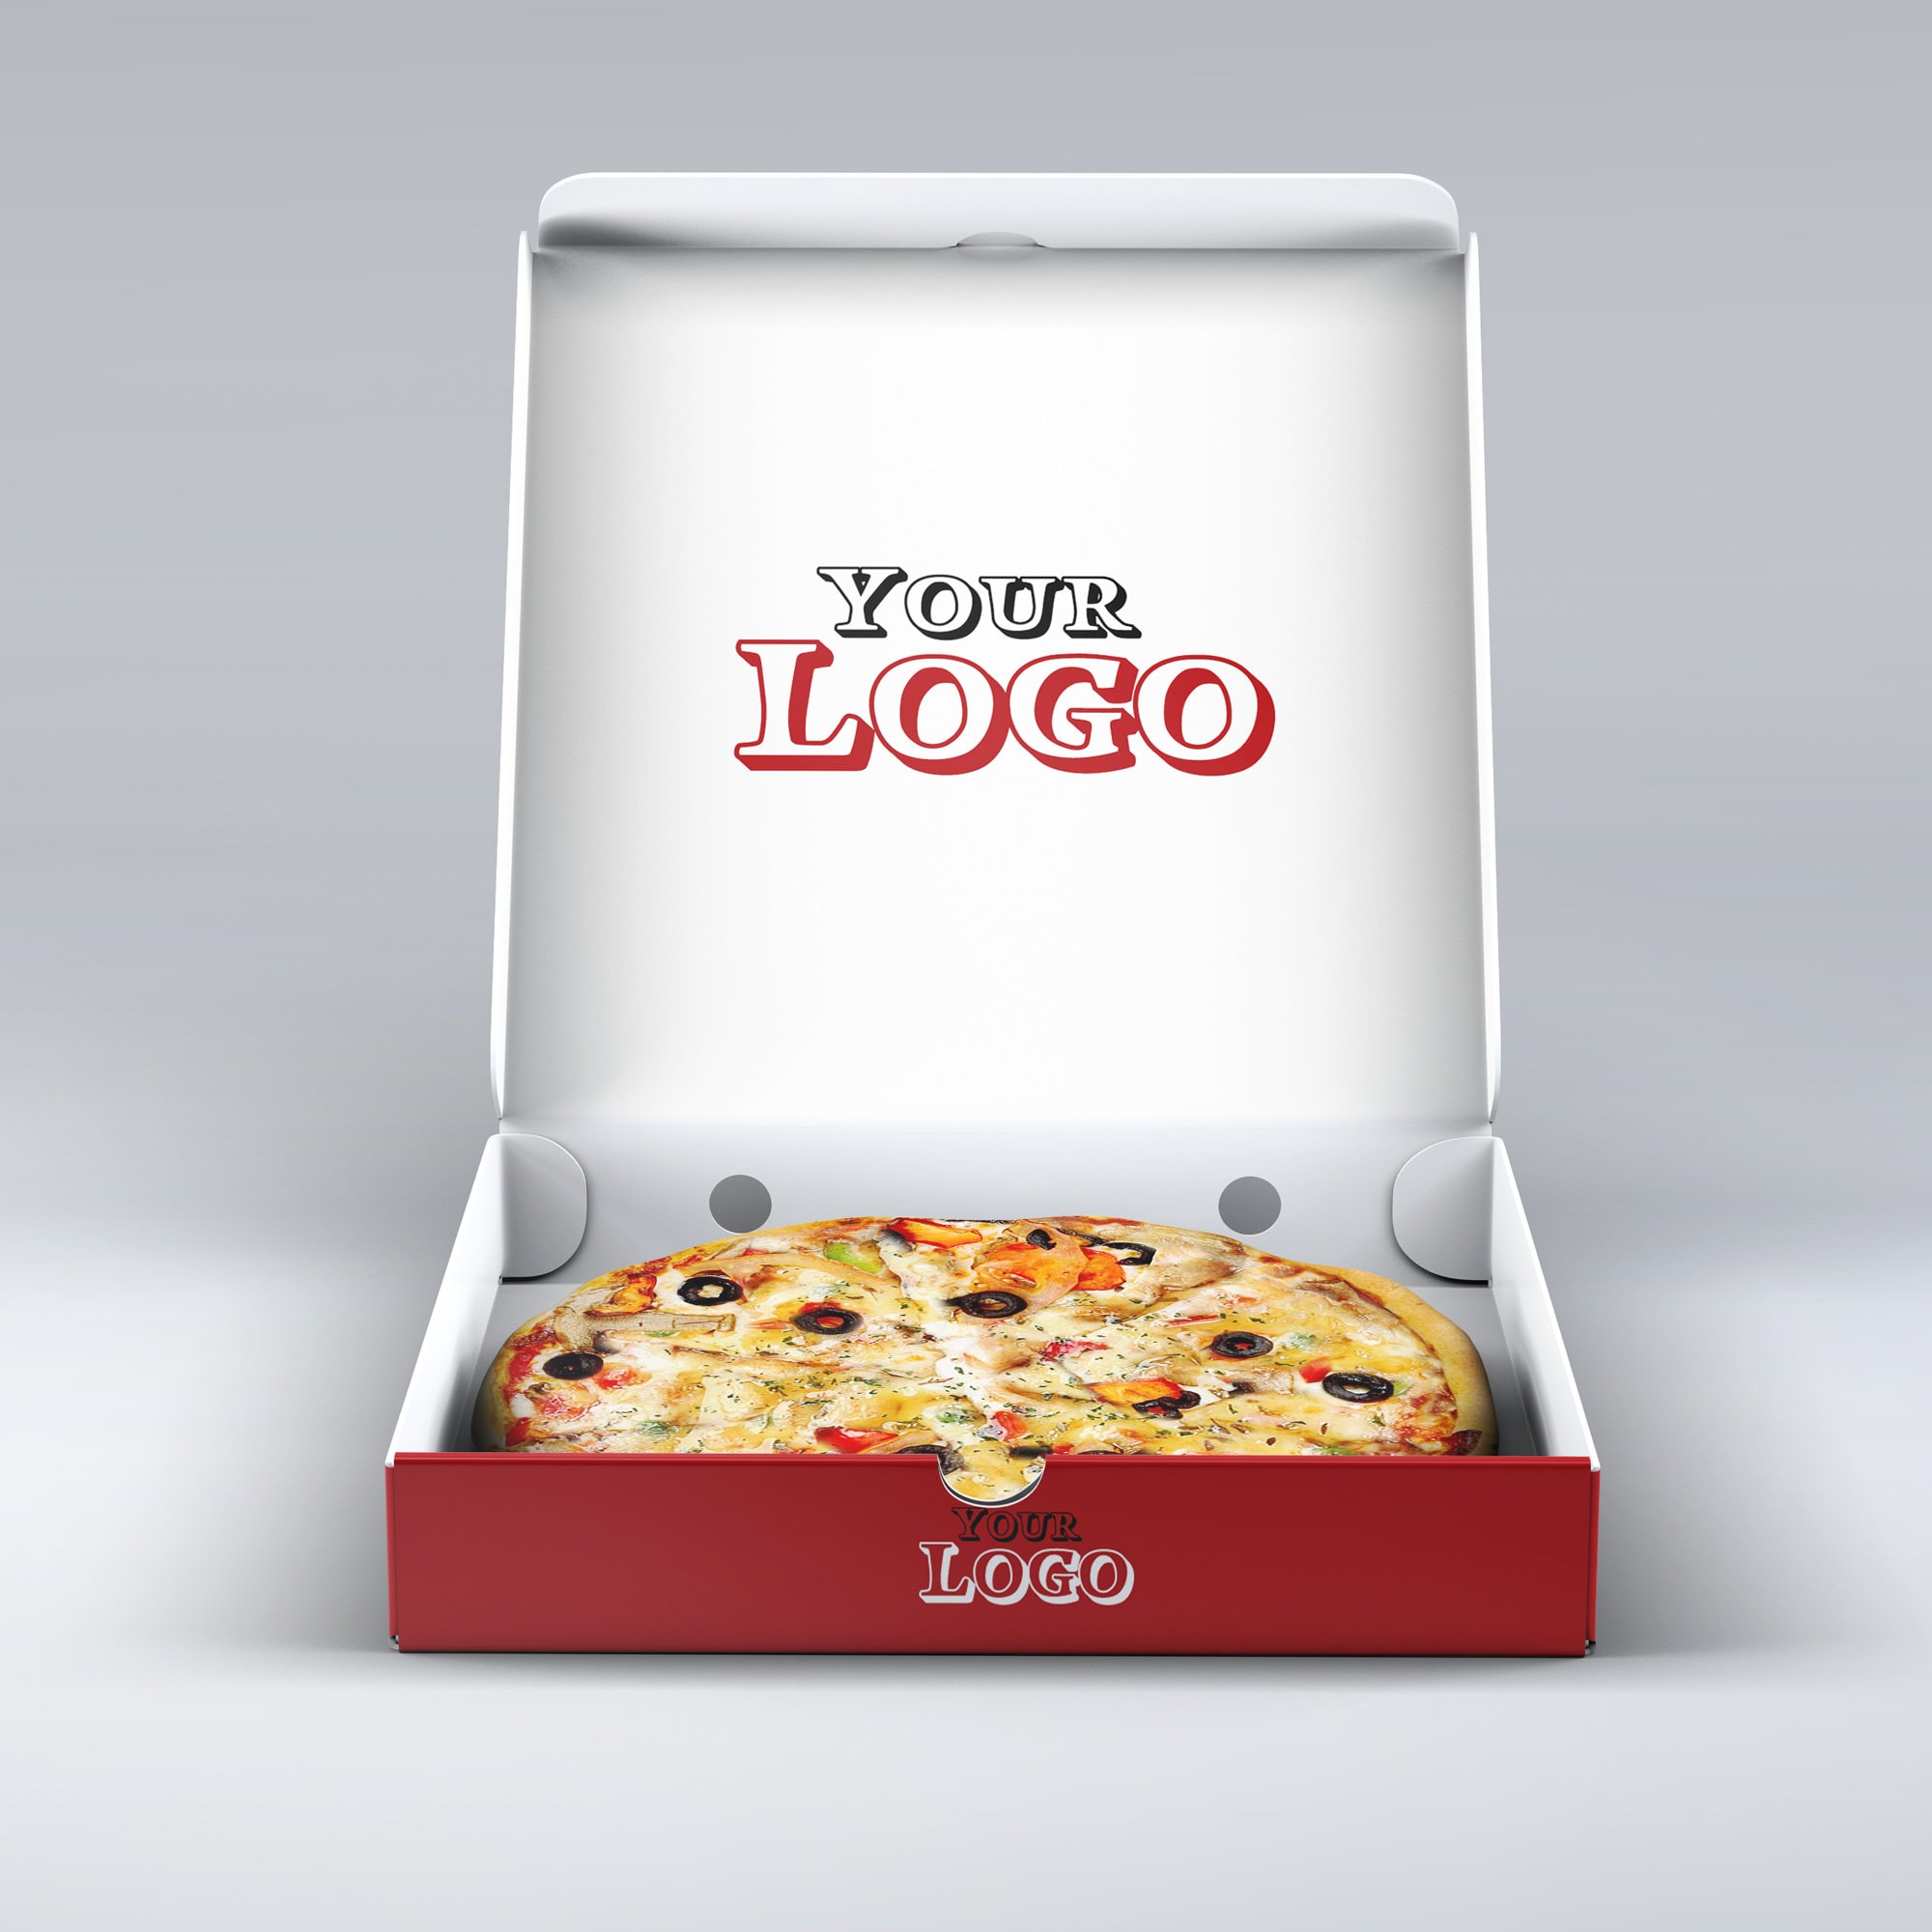 Personalized pizza boxes